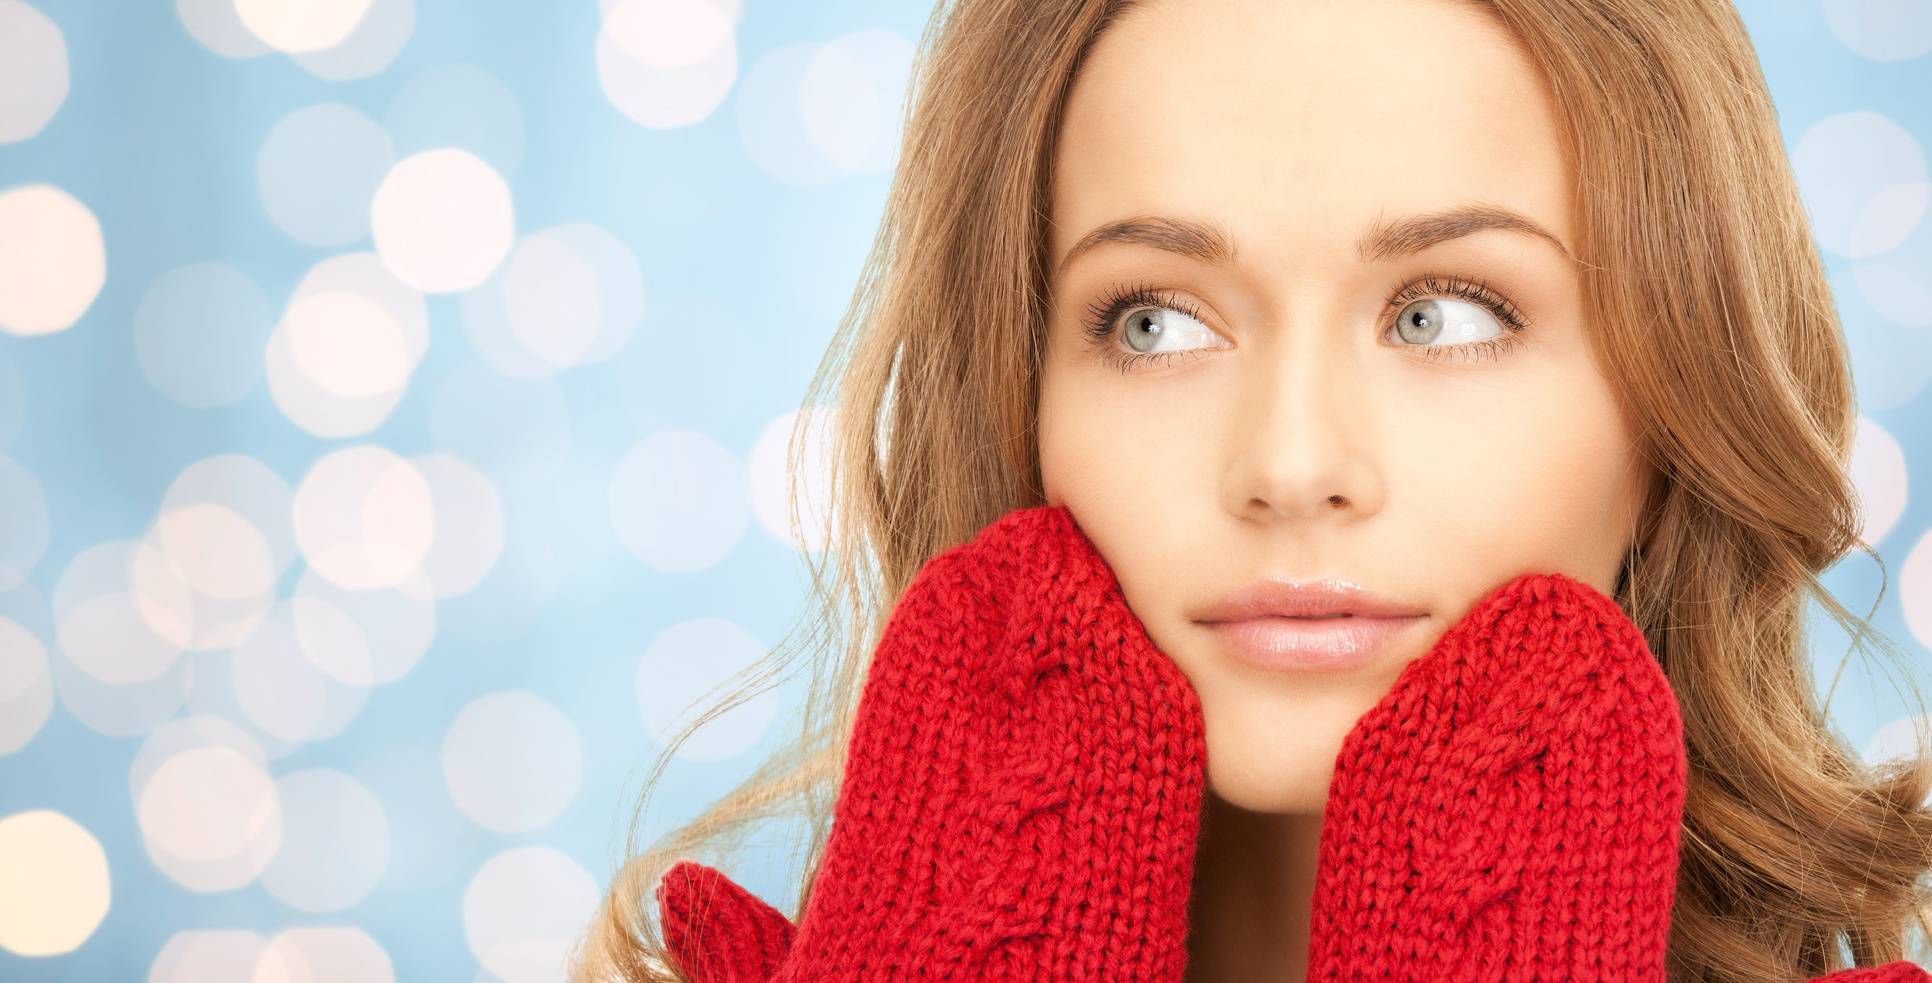 happiness, winter holidays, christmas and people concept - happy young woman in red mittens touching her face over blue lights background